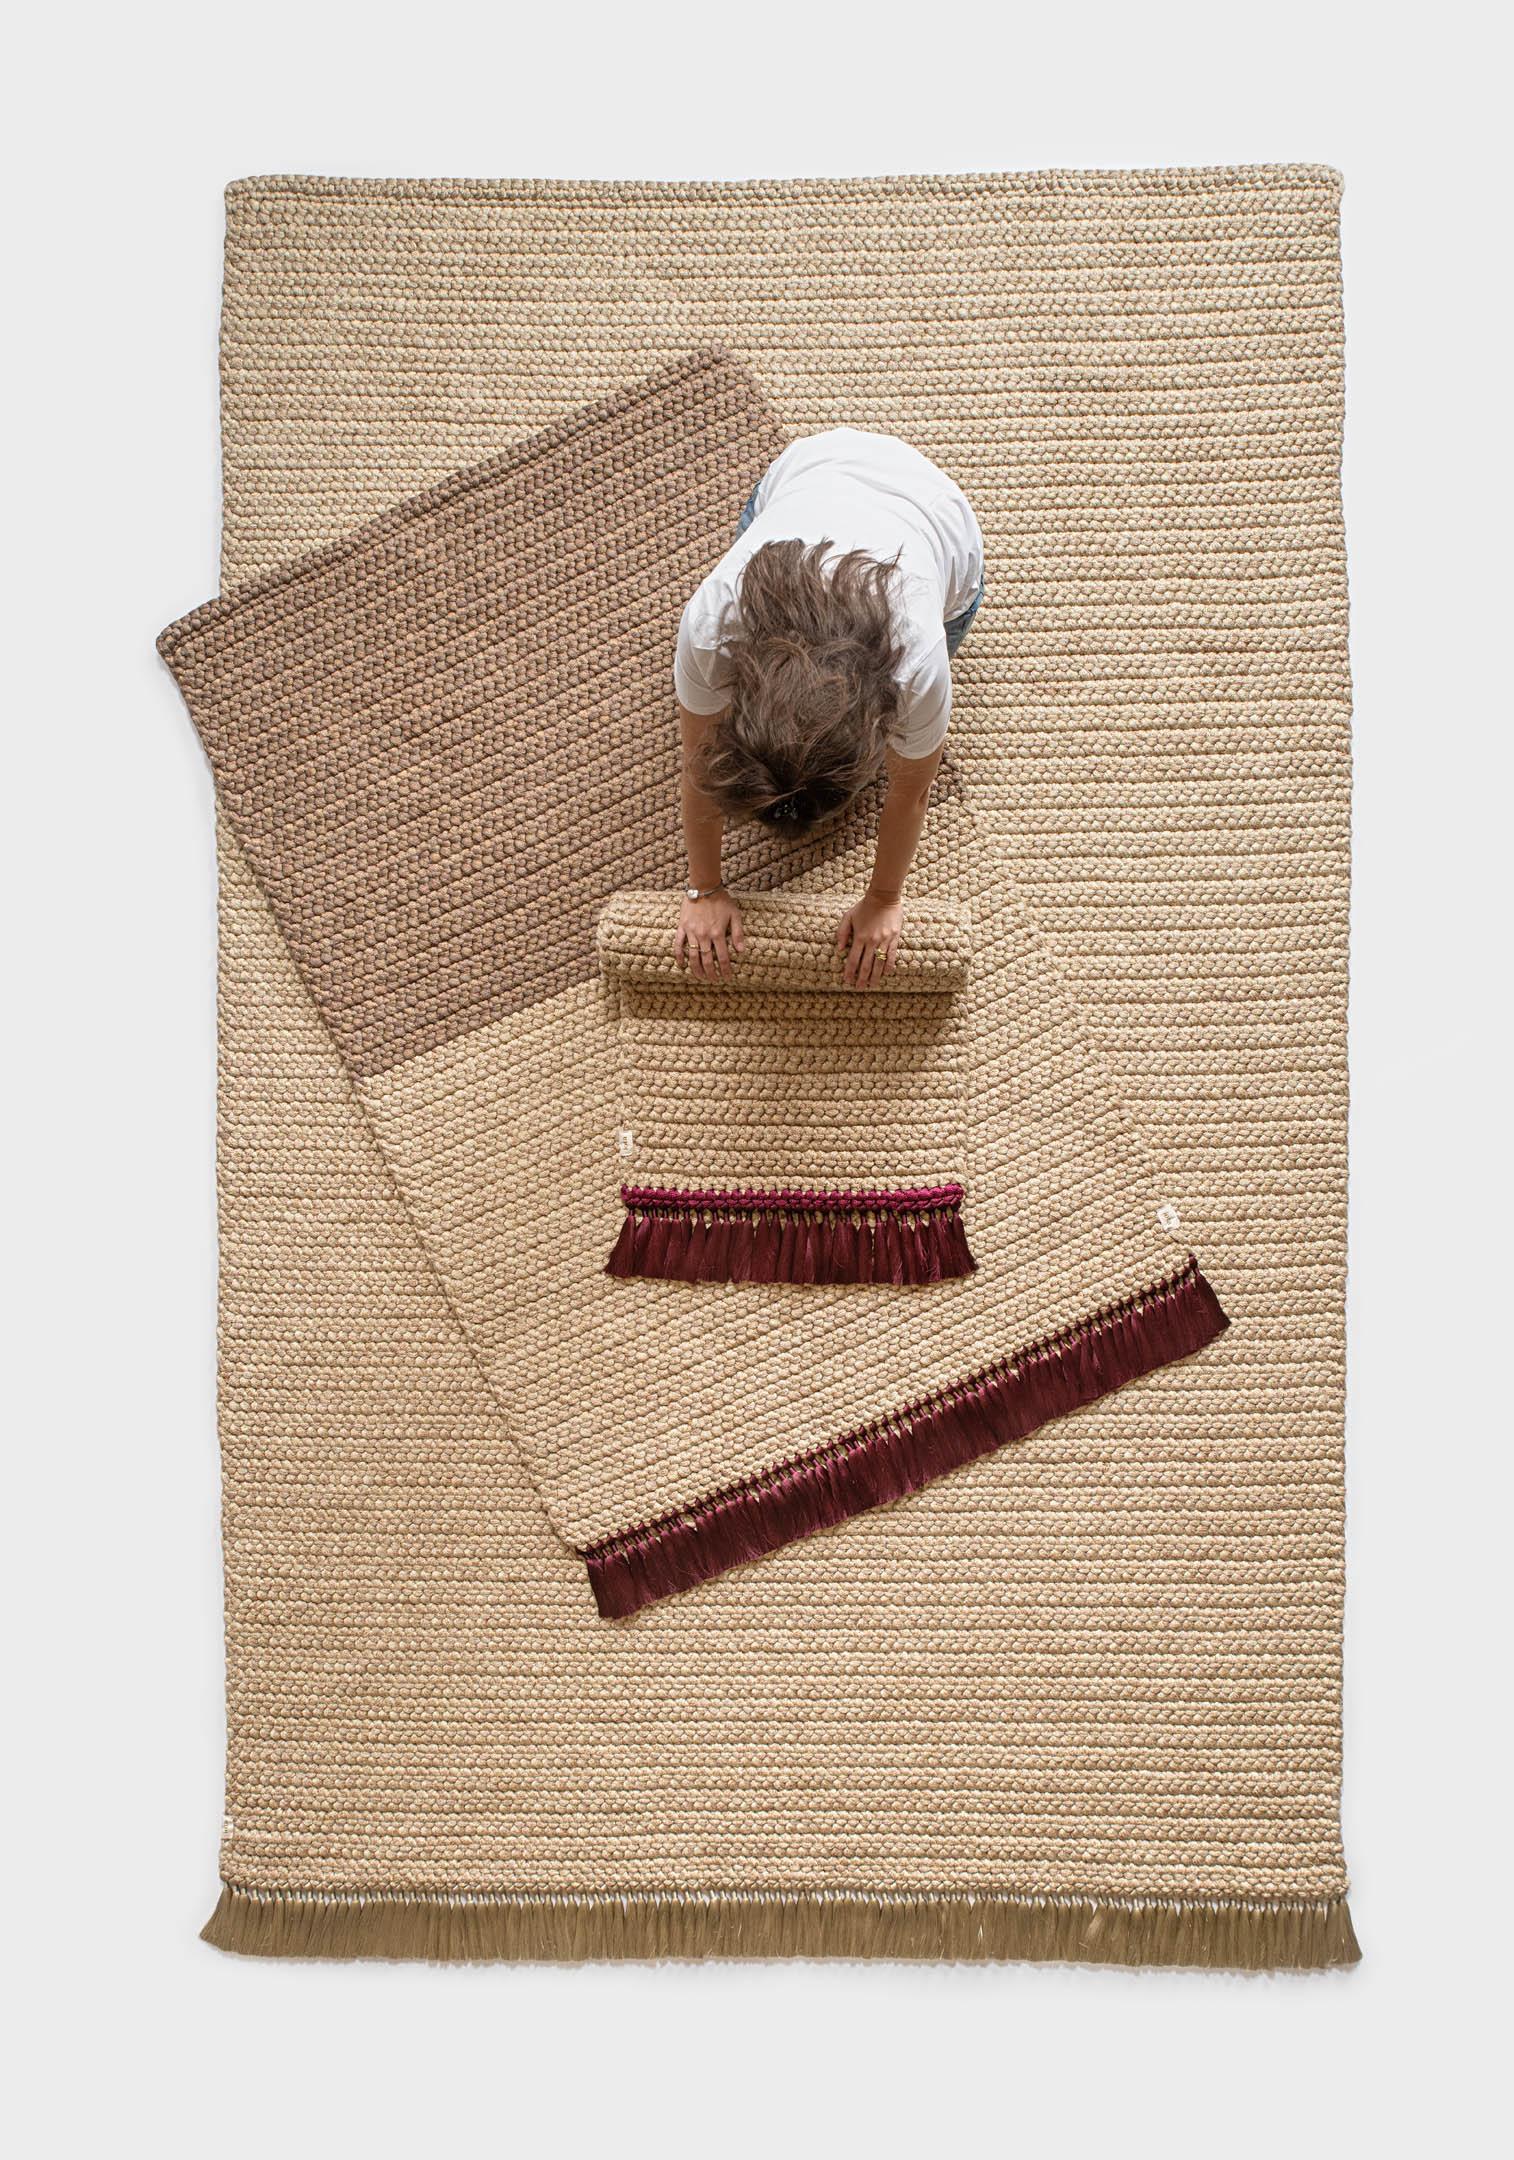 Handmade Crochet Two-Tone Rug in Beige Brown made of Cotton & Polyester by iota 1